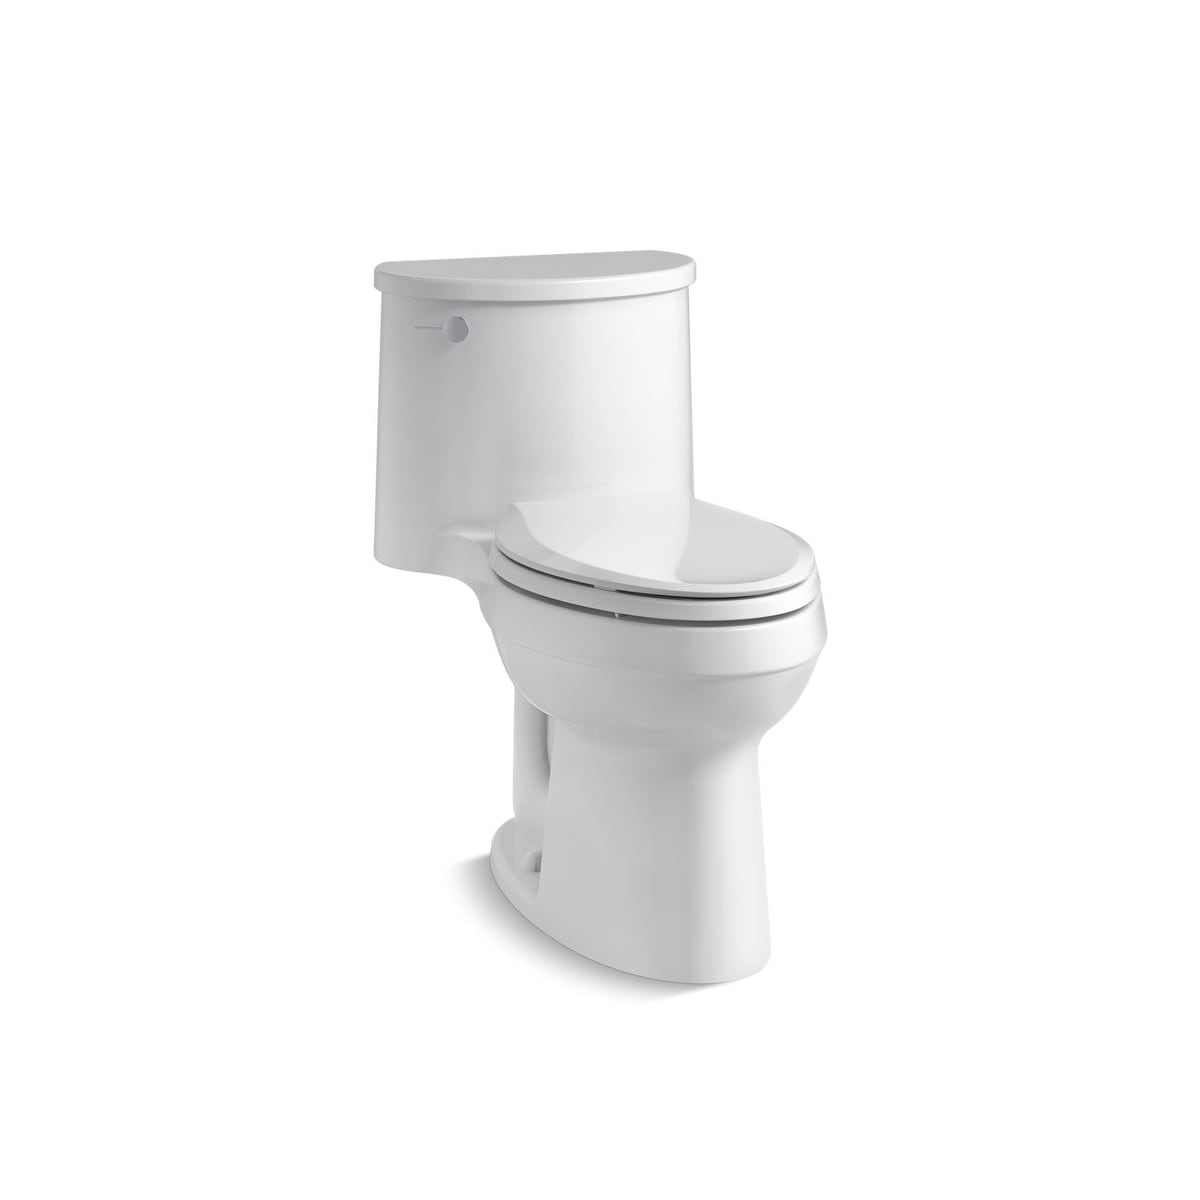 Kohler Adair Comfort Height One-Piece Elongated 1.28 GPF Toilet with  AquaPiston Flushing Technology and Seat Bed Bath  Beyond 21506746